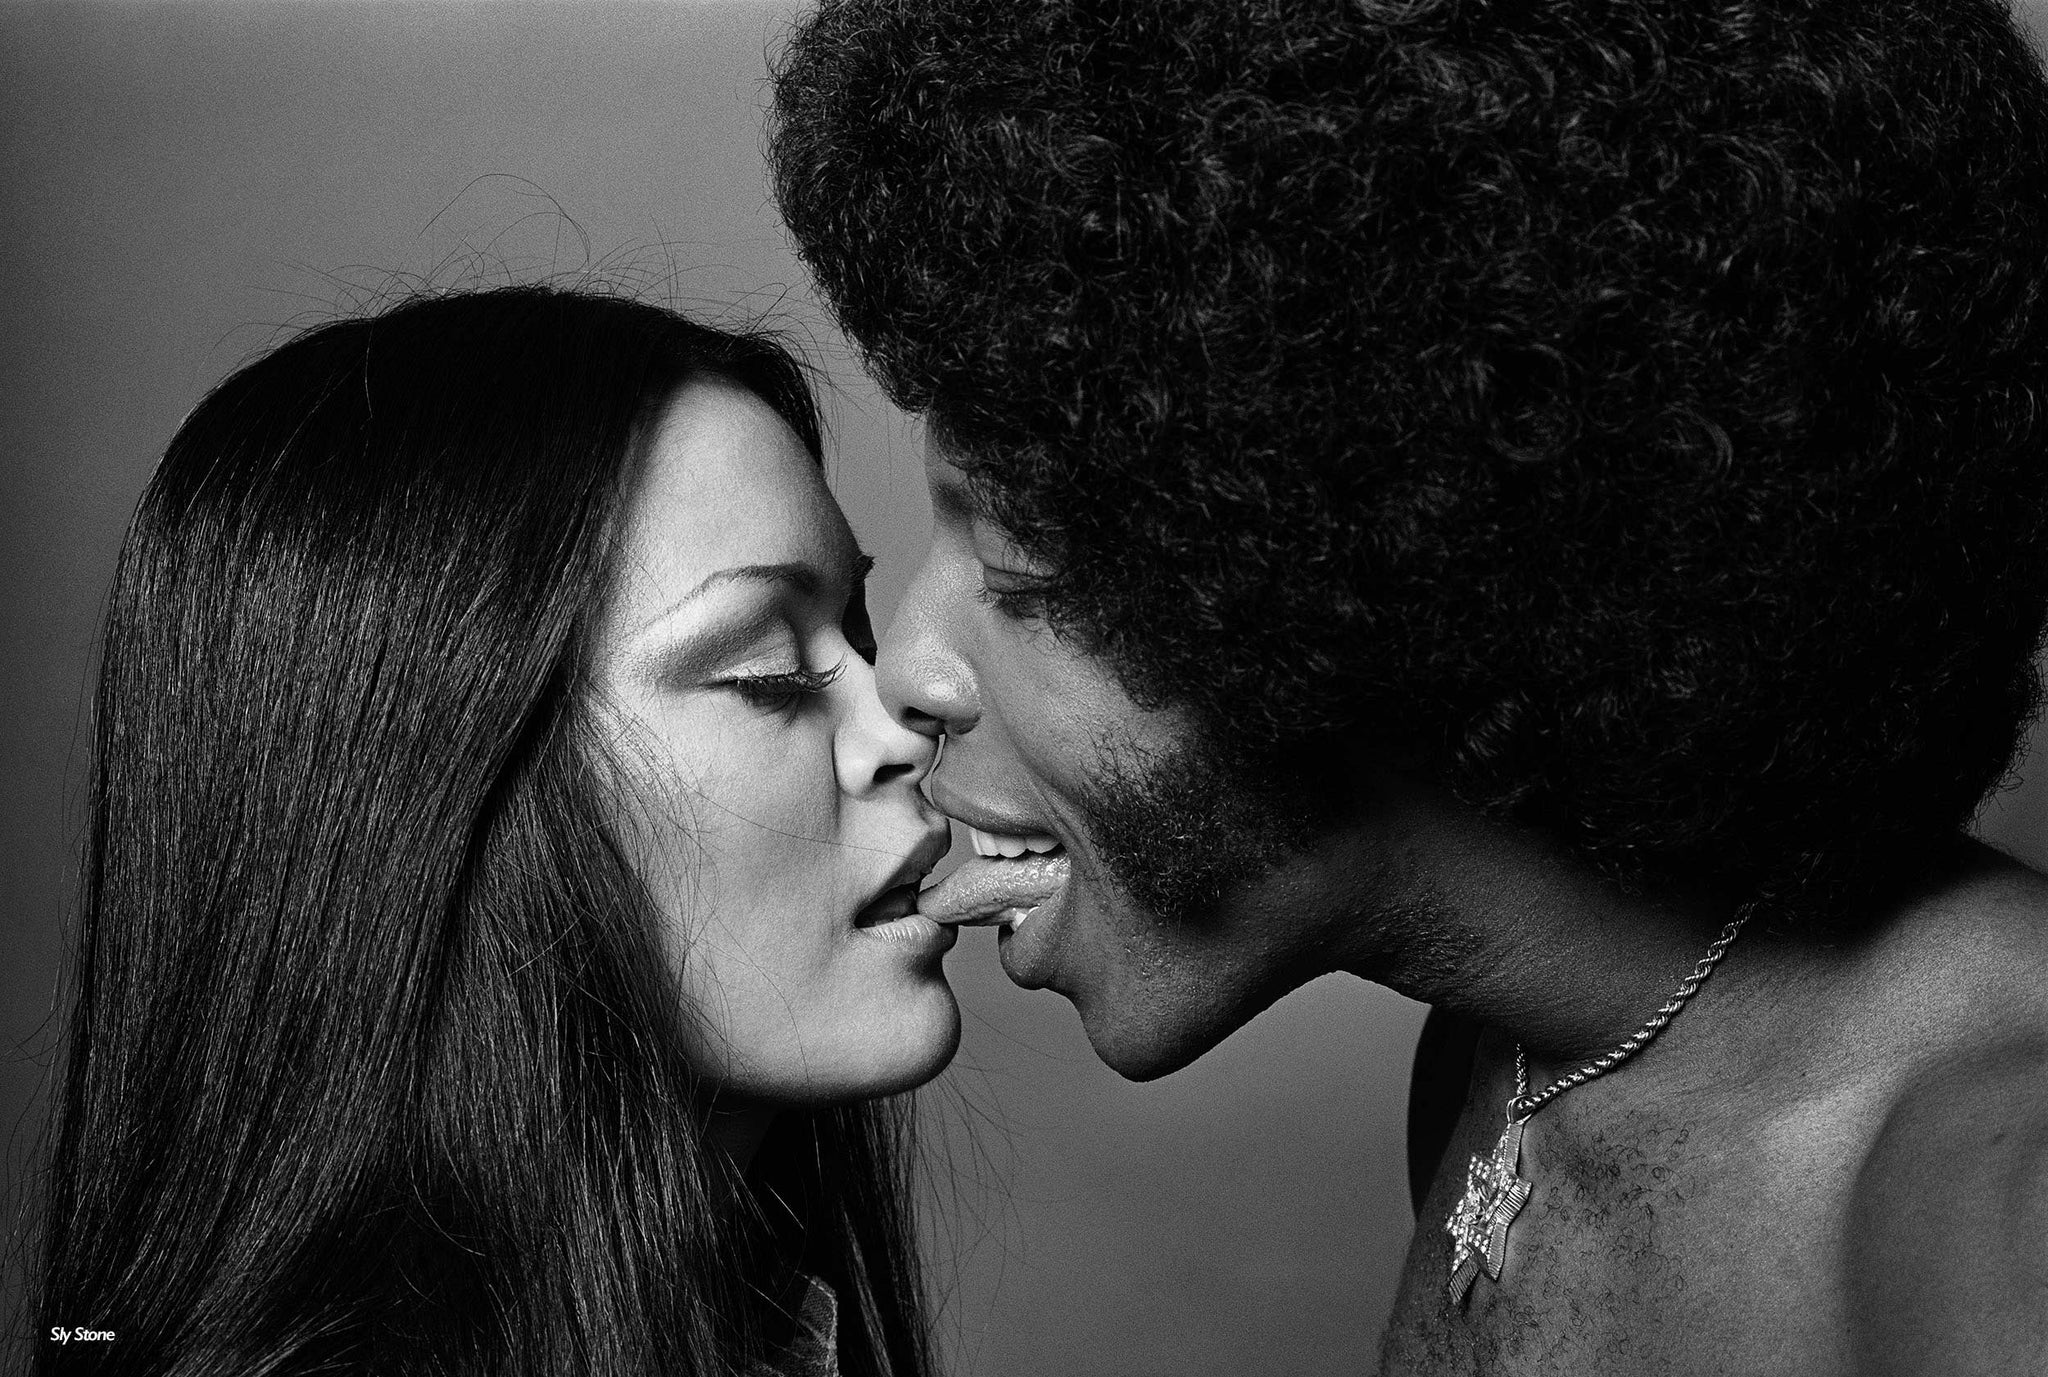 Sly Stone & Kathy Silver, Los Angeles 1974 “The Kiss”